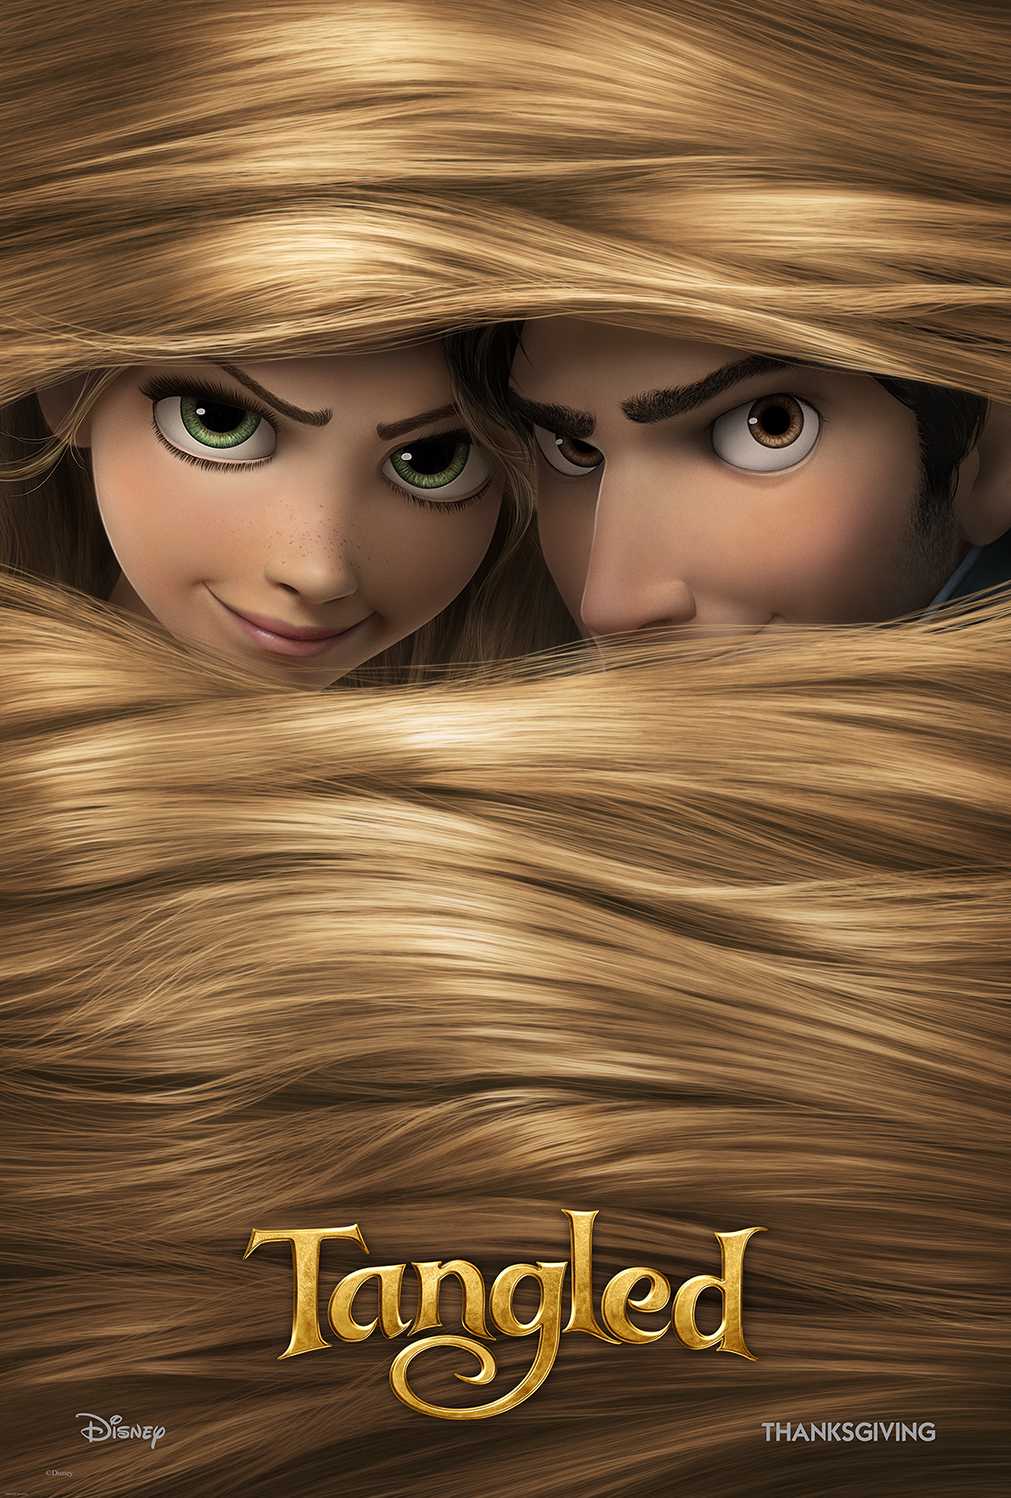 http://www.colamovies.com/shared/img/posters/Tangled%20in%20Disney%20Digital%203D.jpg